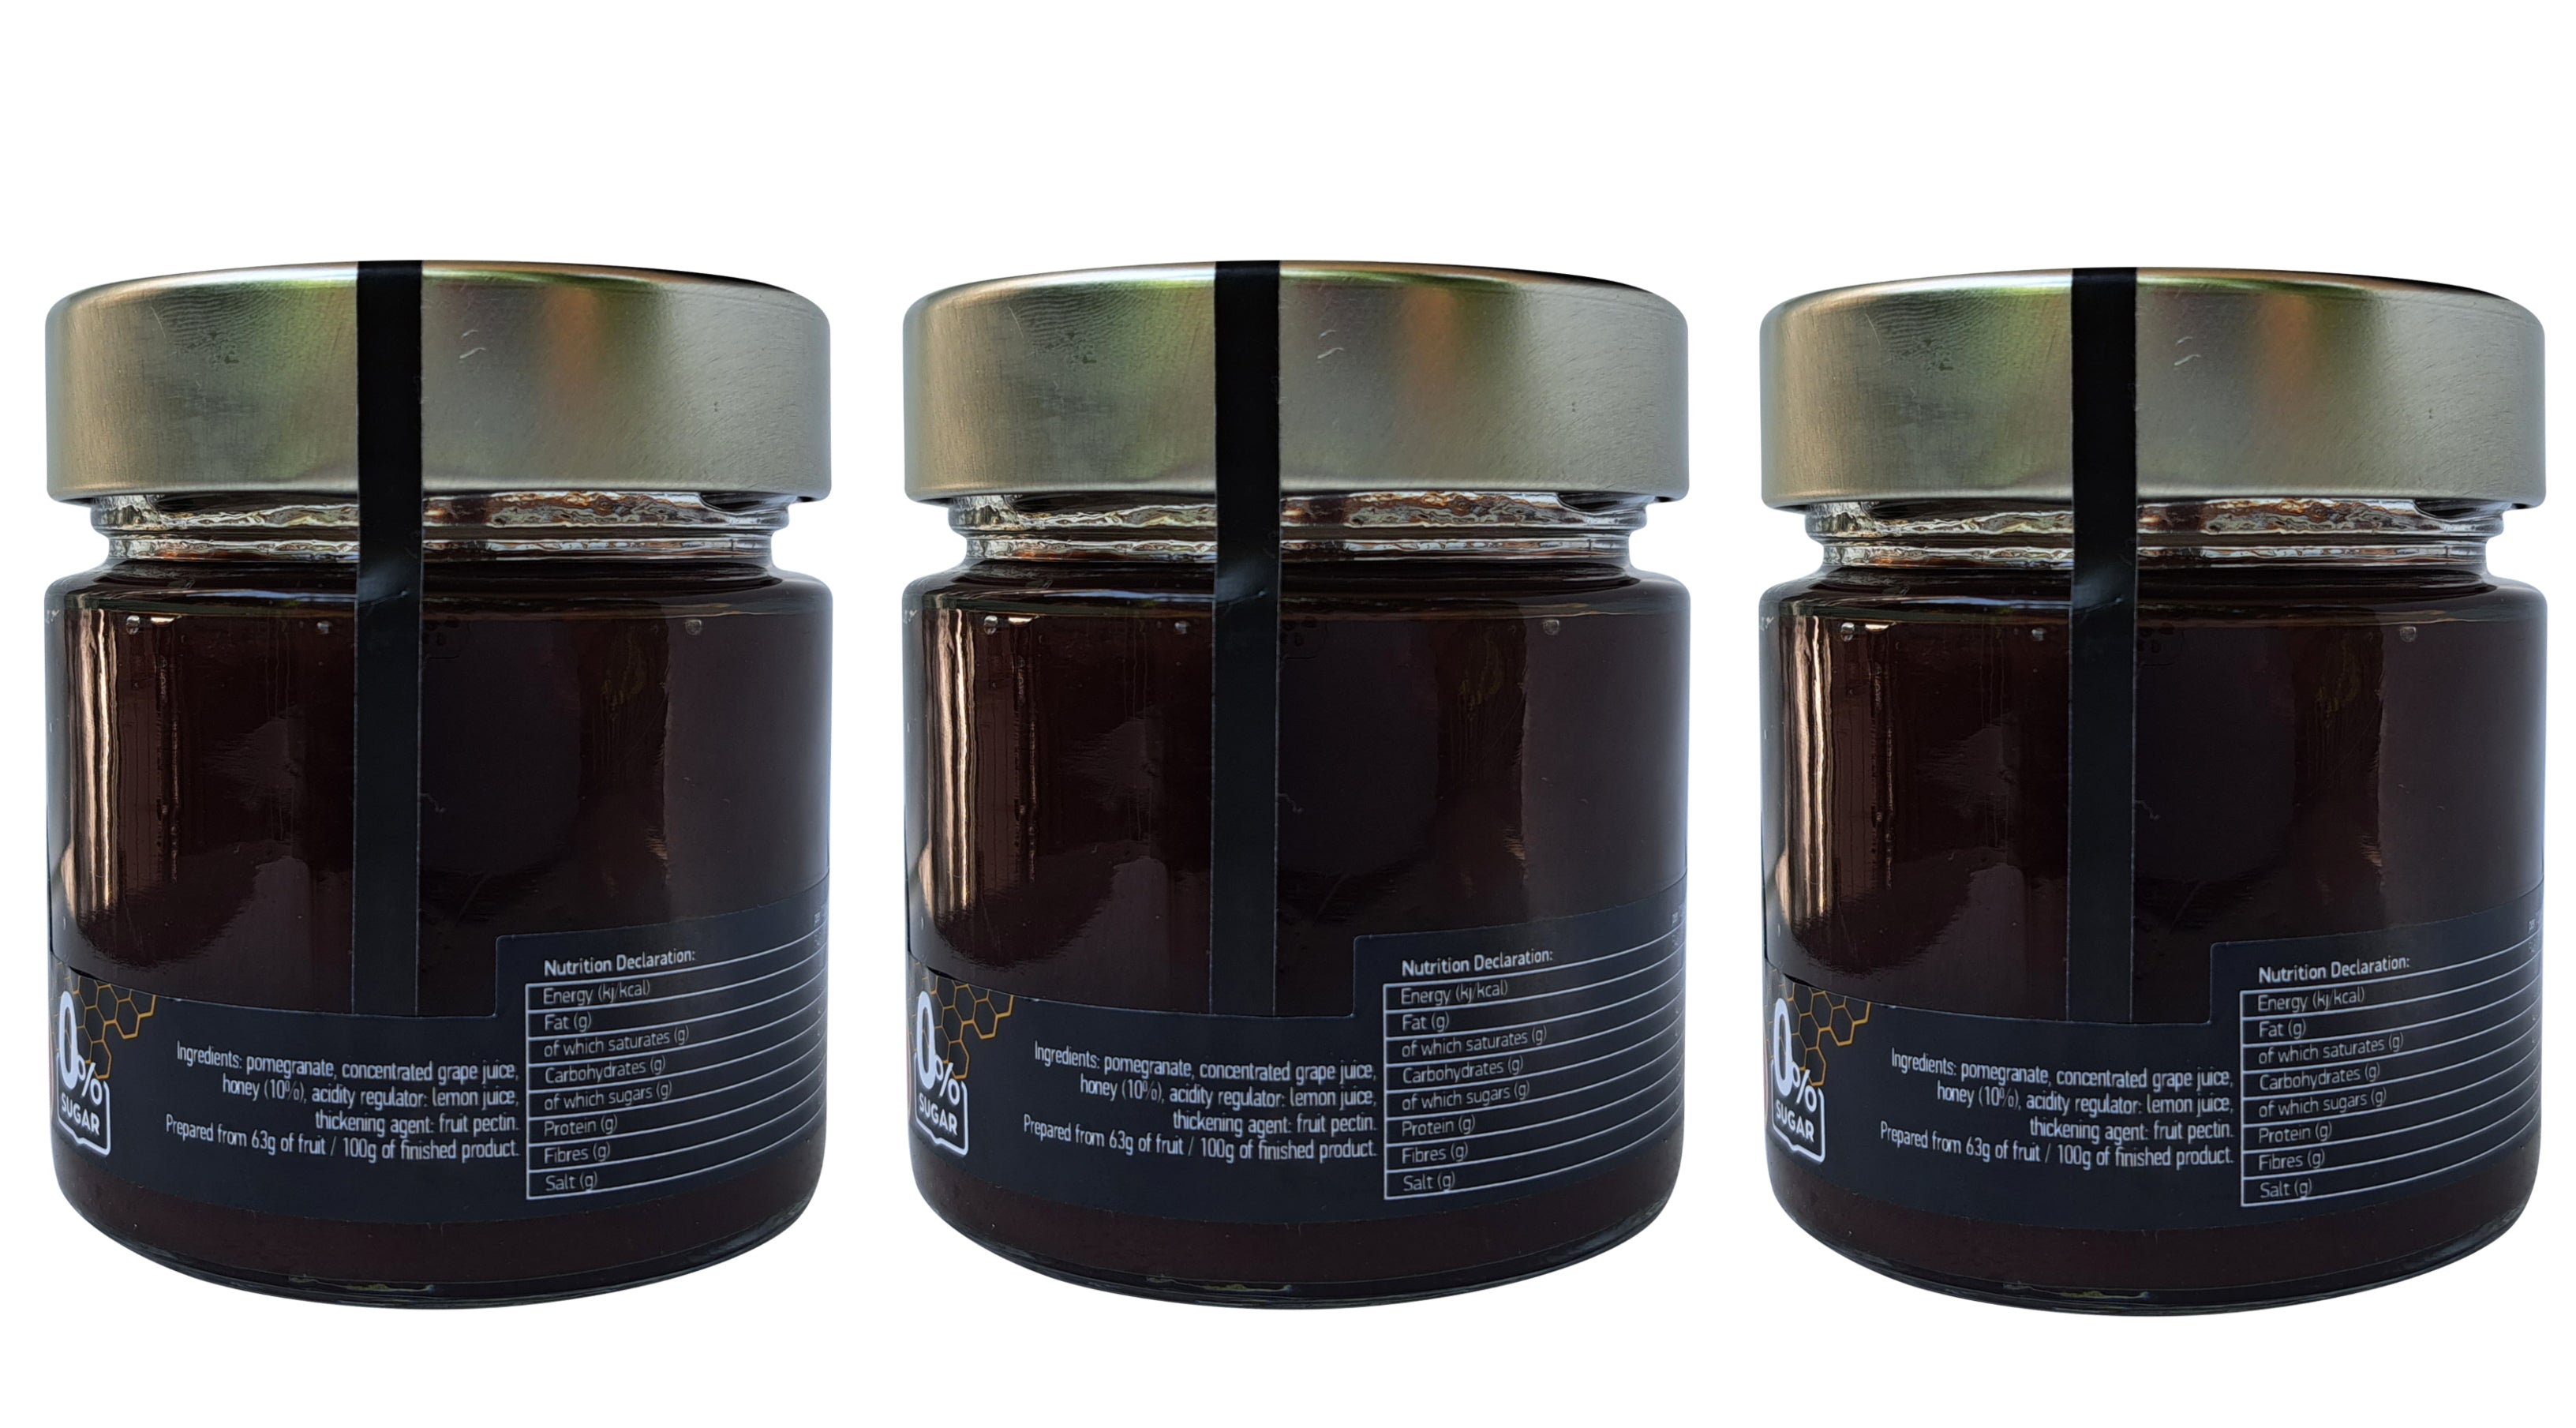 Greek Natural 100% Ηandmade Fruit Spread Pomegranate with Honey 4